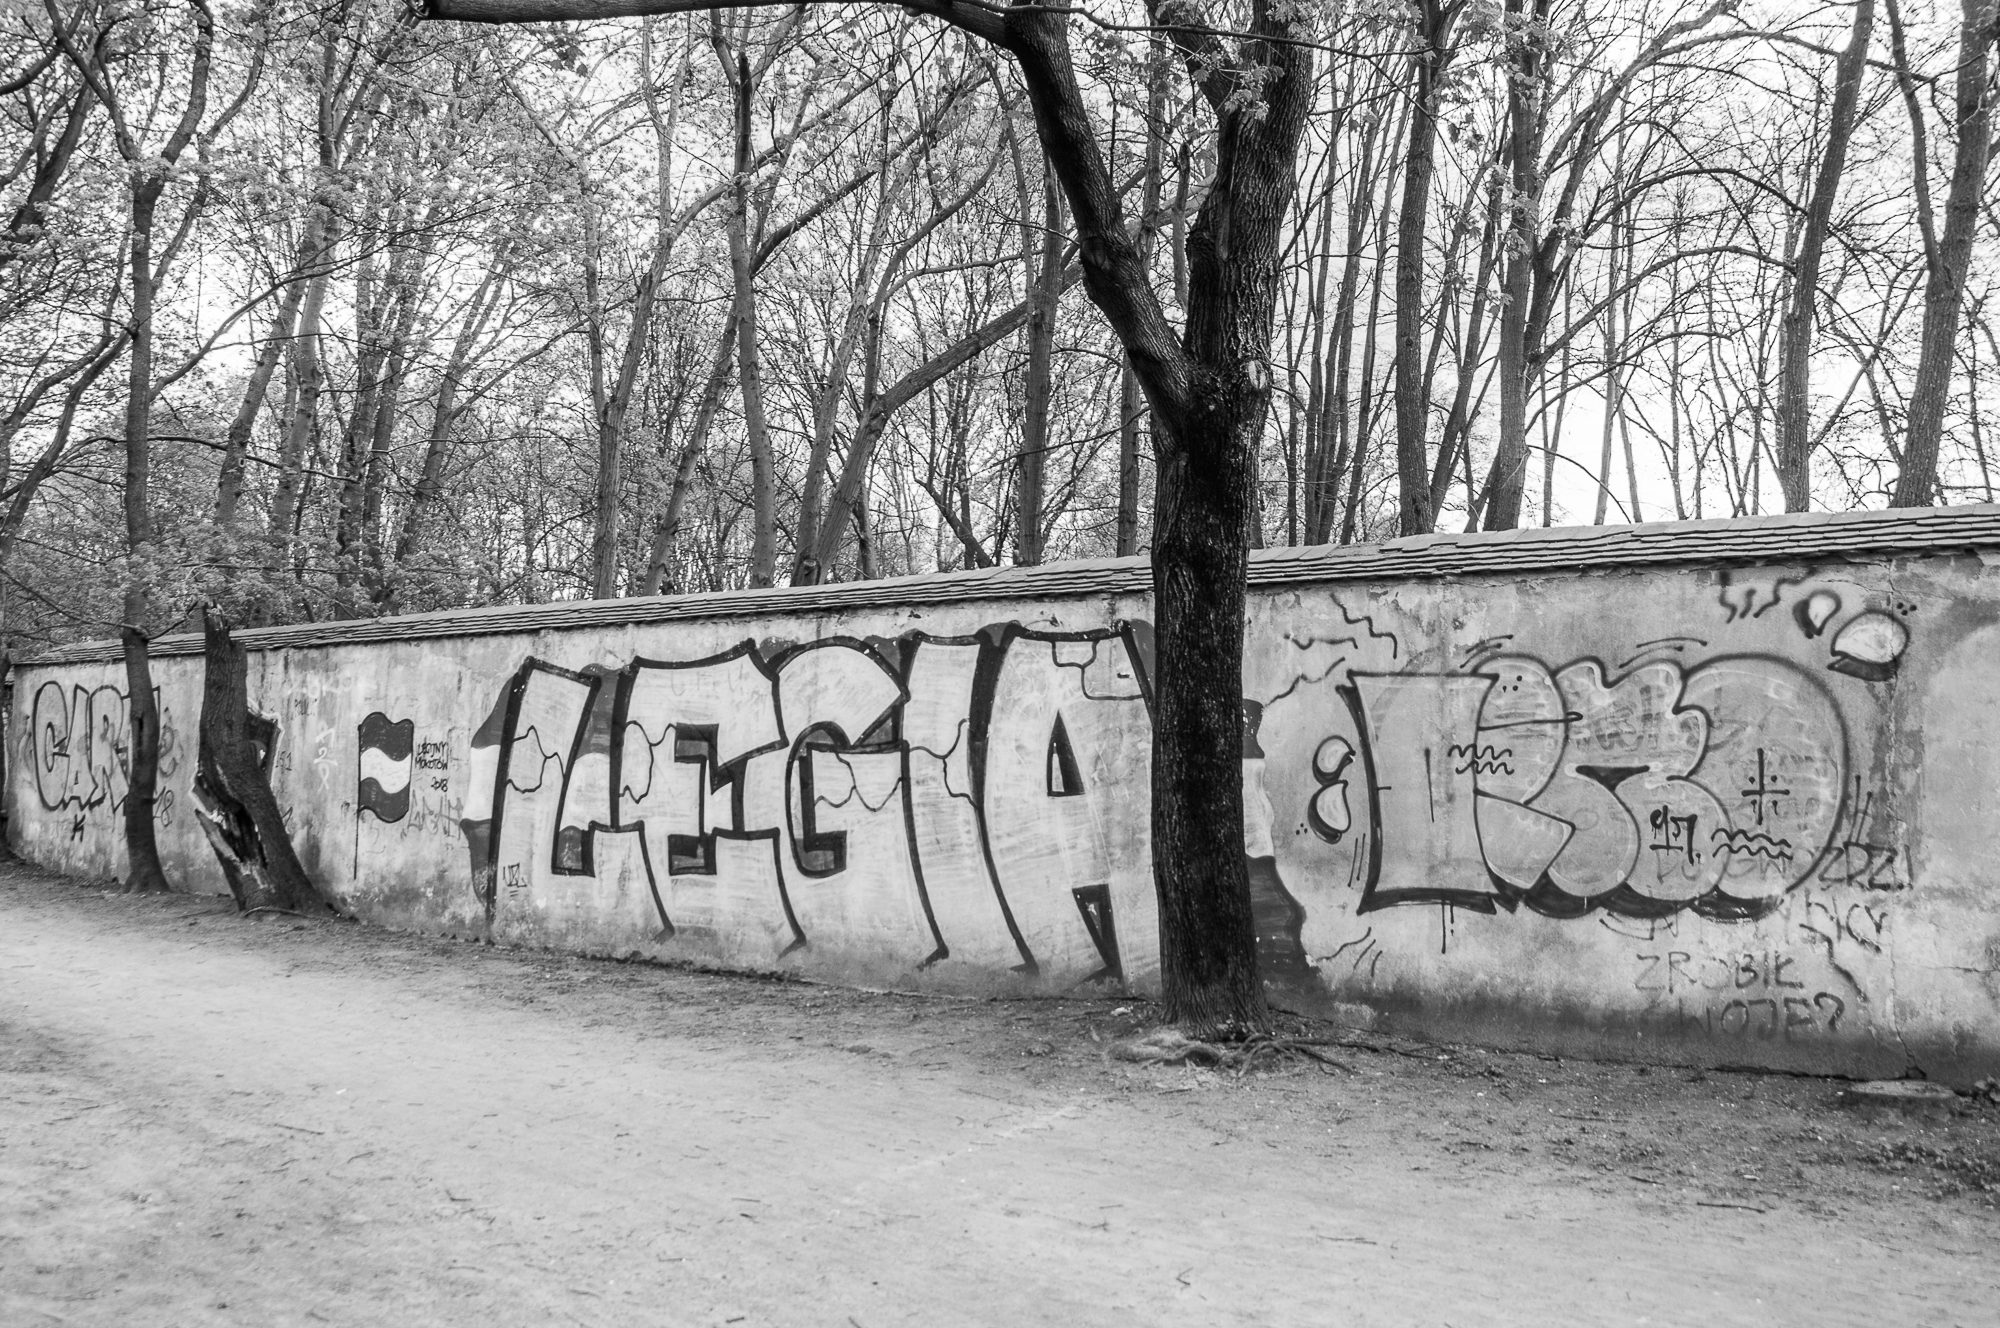 Adam Mazek Photography 2022. Warsaw Street Photography. Post: "Fight for yourself, but do not fight with others." Minimalism. Tree and graffiti.